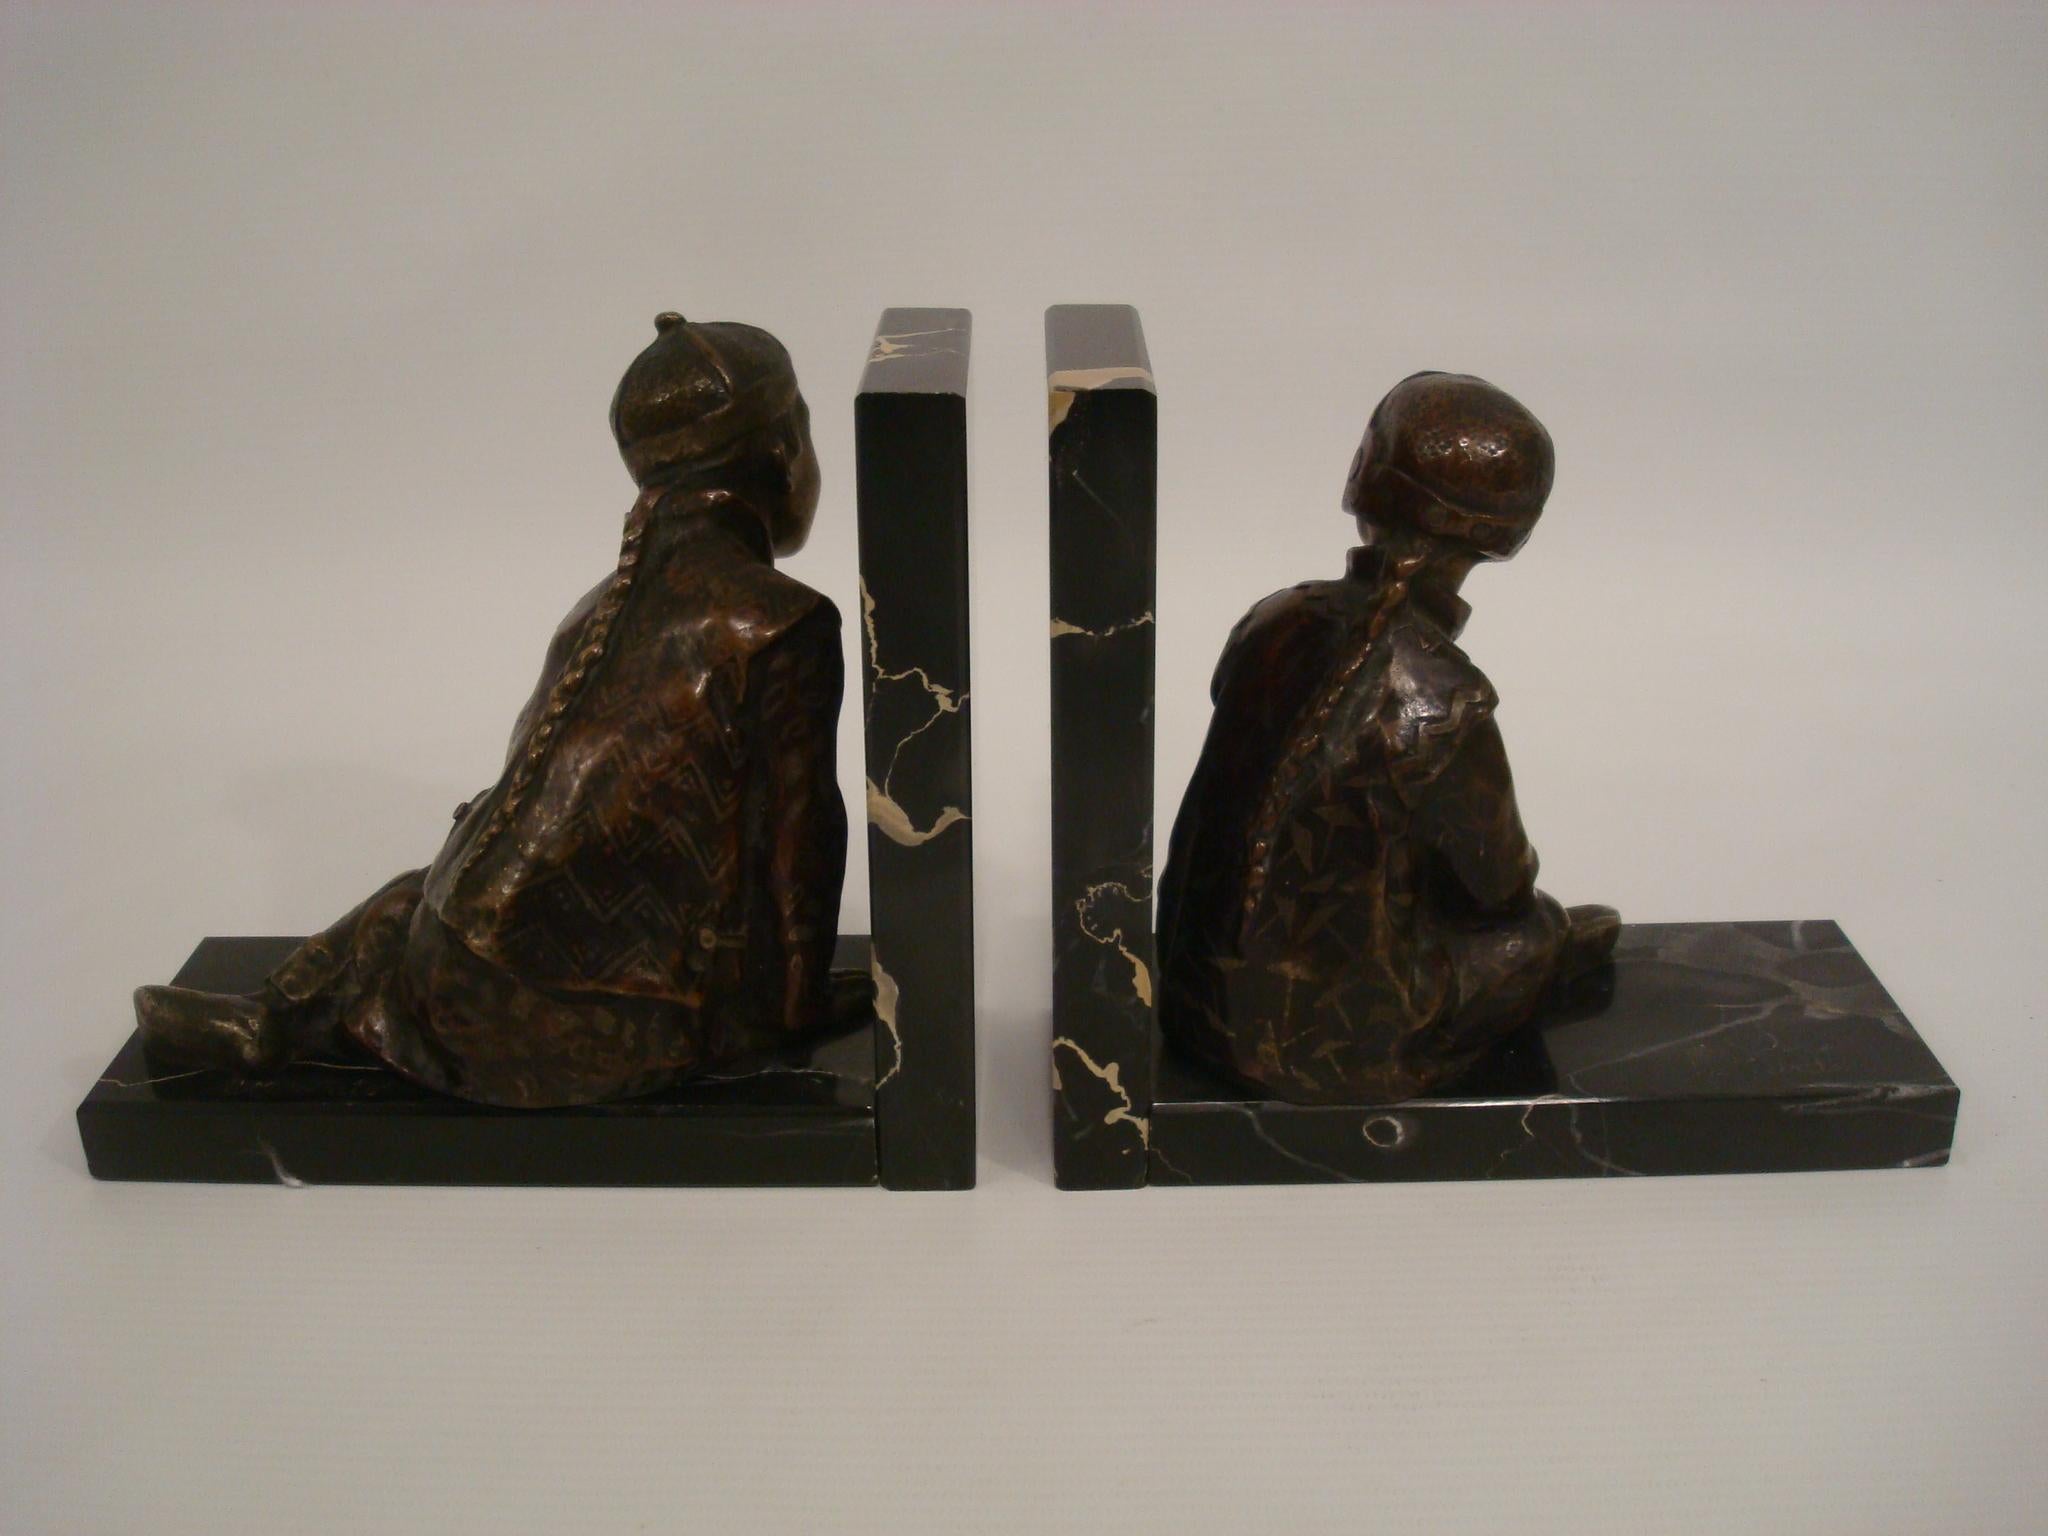 Art Deco bronze bookends of Chinese children playing by M. White, England, 1920.
A pair of bronze bookends with Chinese children playing, one is playing with a ball the other is hidding. By Mabel White. English sculptress. Worked in London. Pupil of